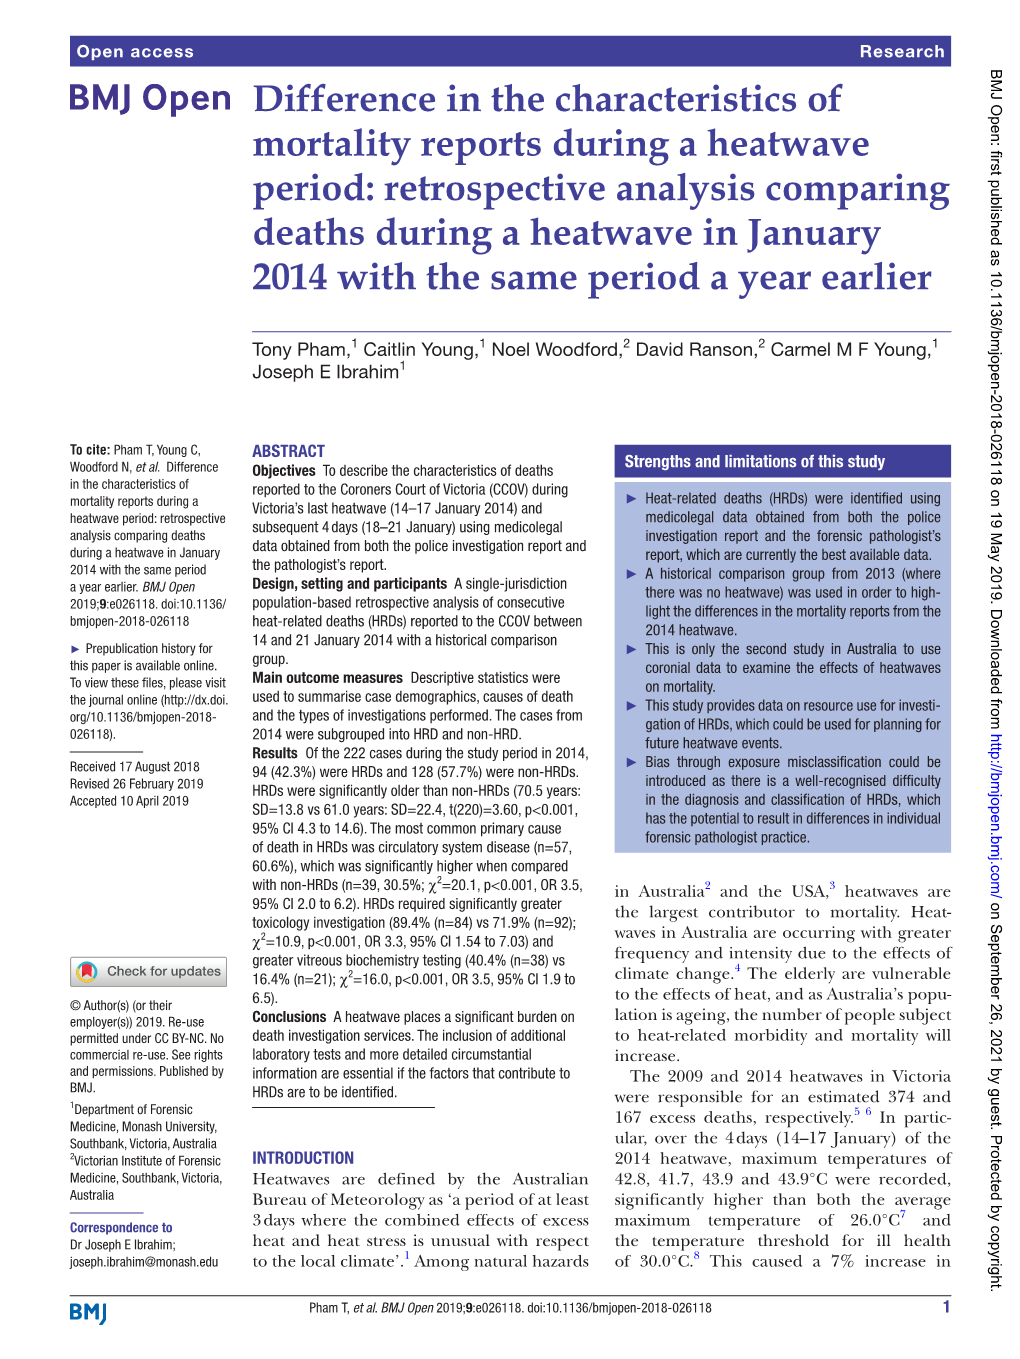 Retrospective Analysis Comparing Deaths During a Heatwave in January 2014 with the Same Period a Year Earlier